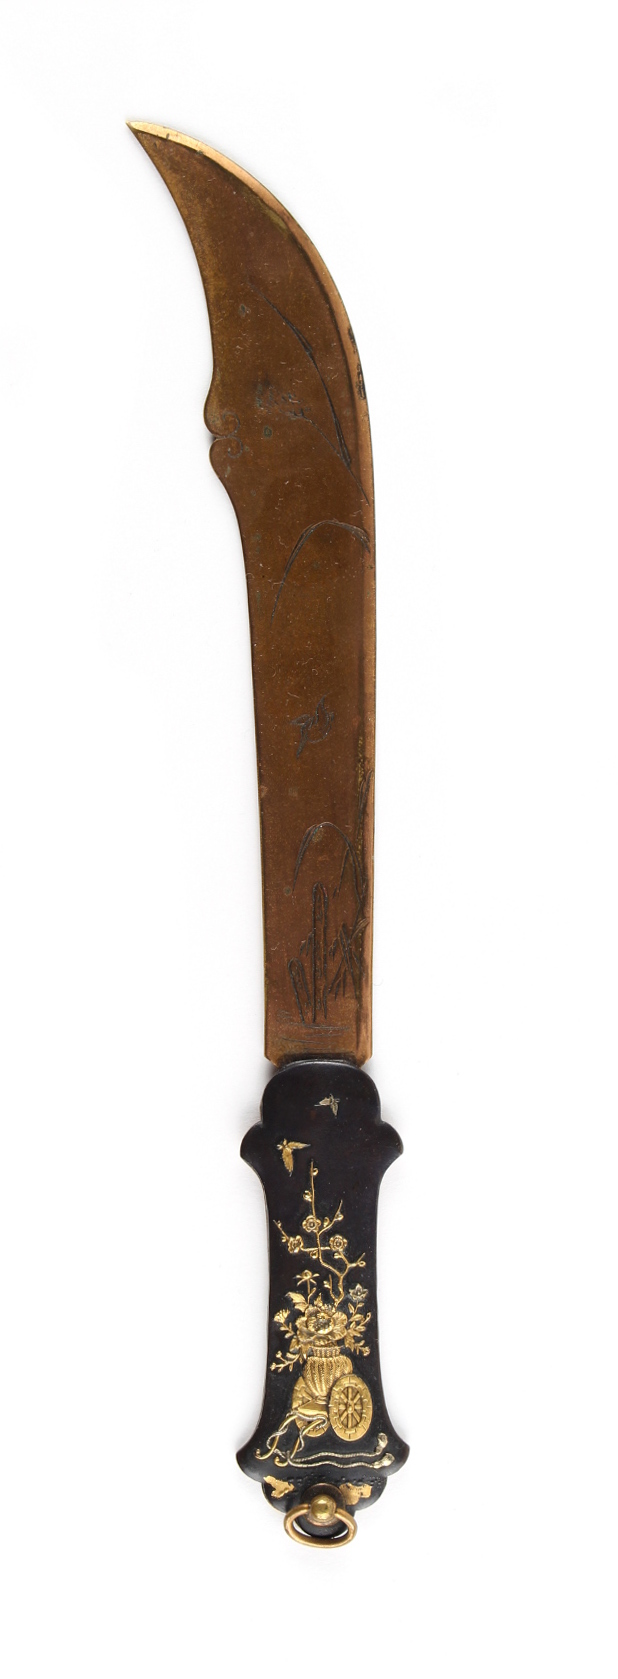 Property of a gentleman - a Japanese shakudo paperknife, Meiji period (1868-1912), decorated with